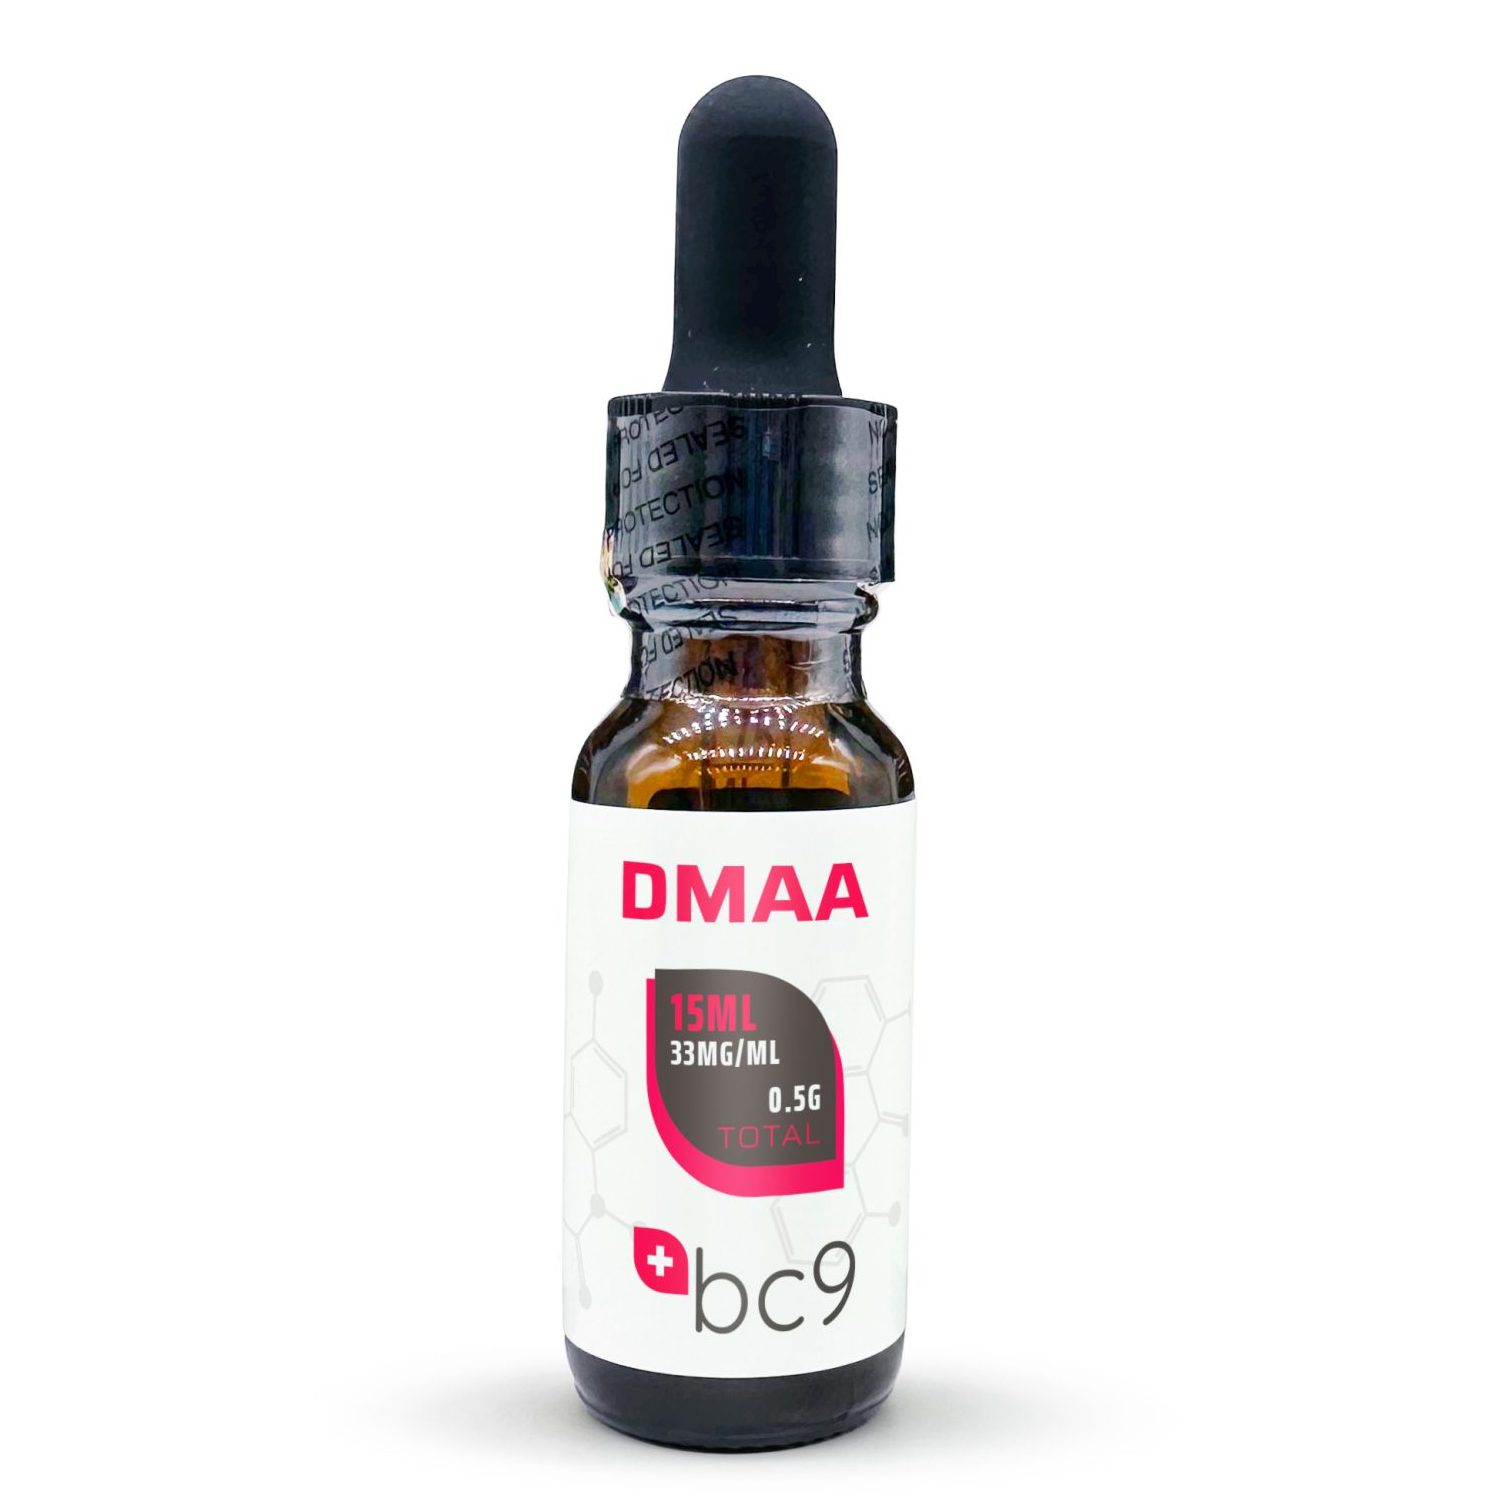 DMAA Liquid For Sale | Fast Shipping | BC9.org